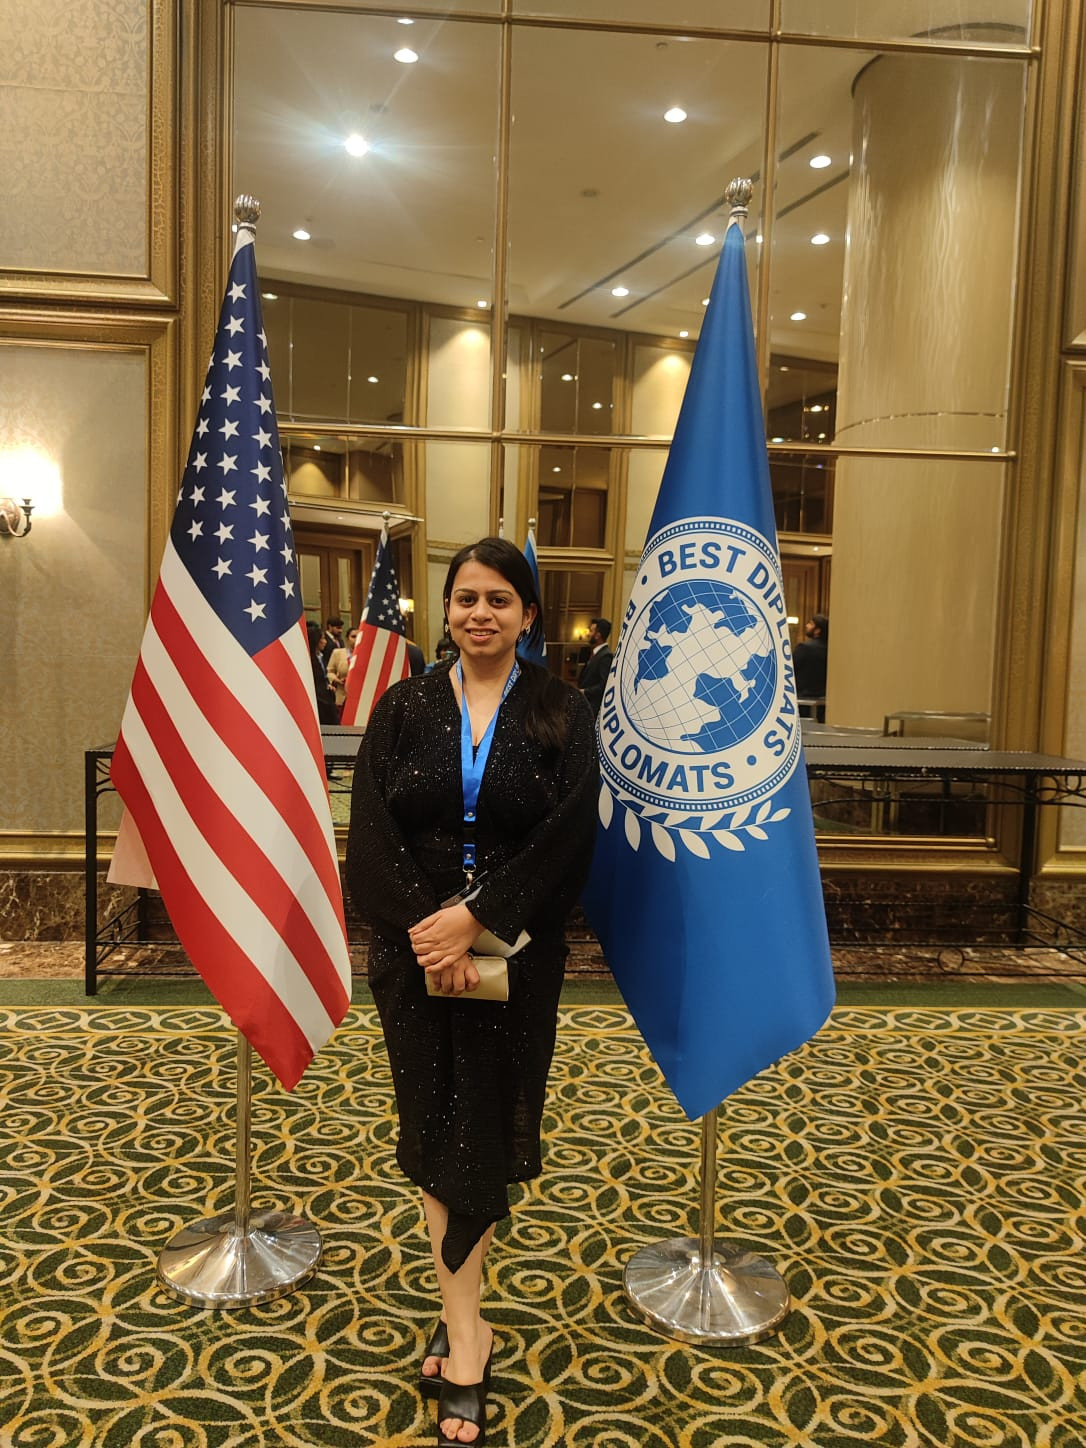 MISS. DIKSHA BHARTI'S AMAZING RECOGNITION: OUTSTANDING DIPLOMAT PRESTIGIOUS AWARD BY UNITED NATIONS